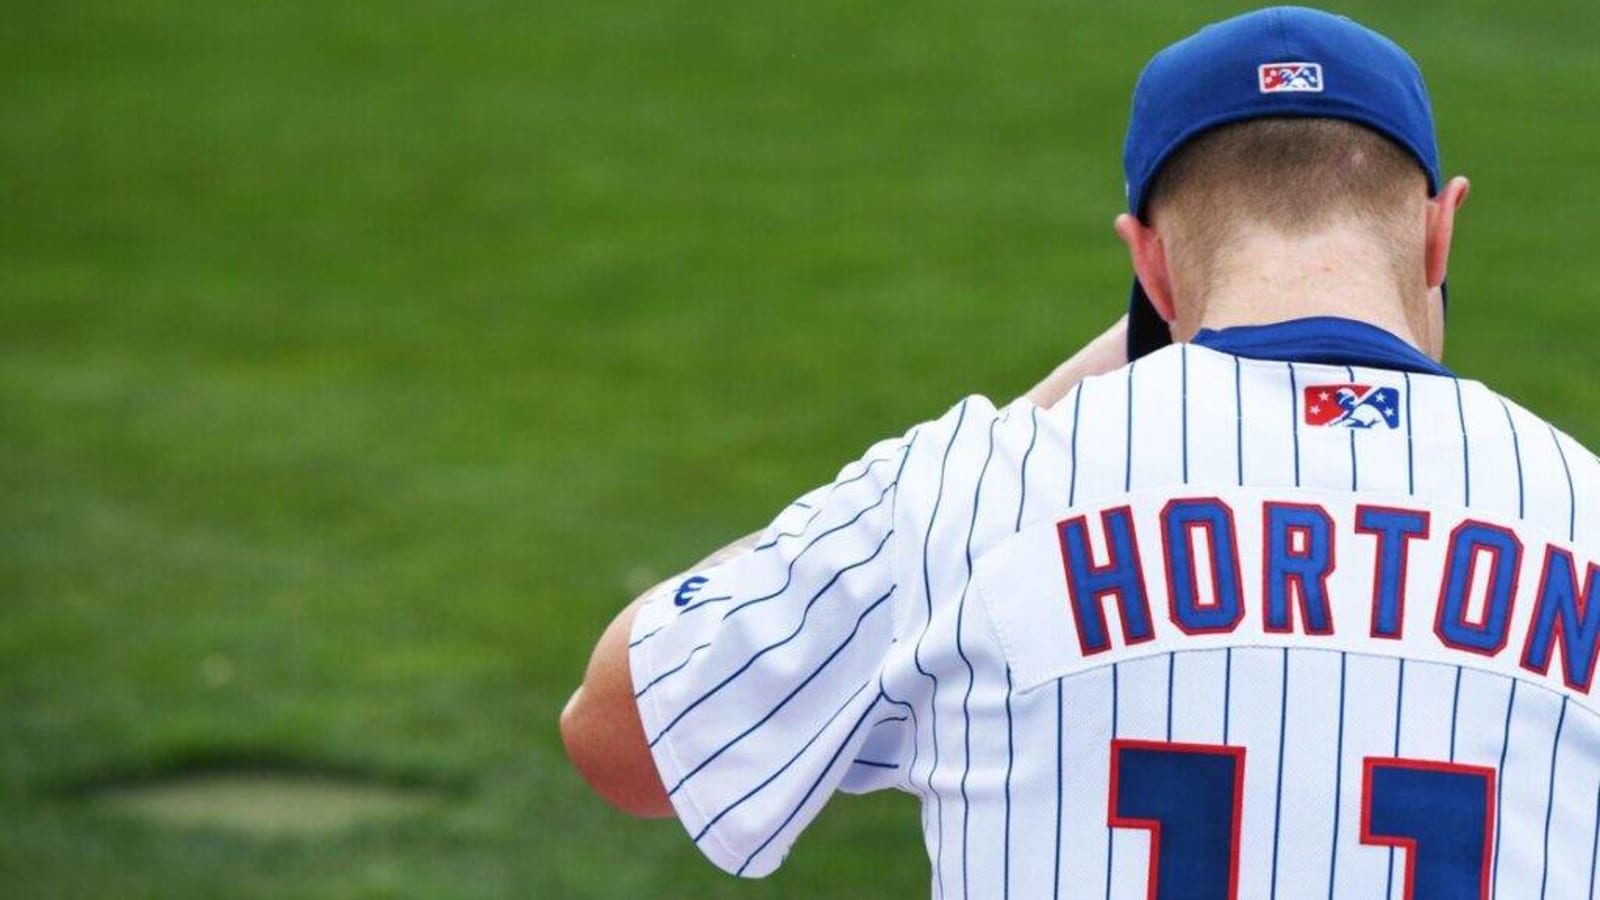 Cubs Prospect Profile: Cade Horton Continues to Impress in the Farm System